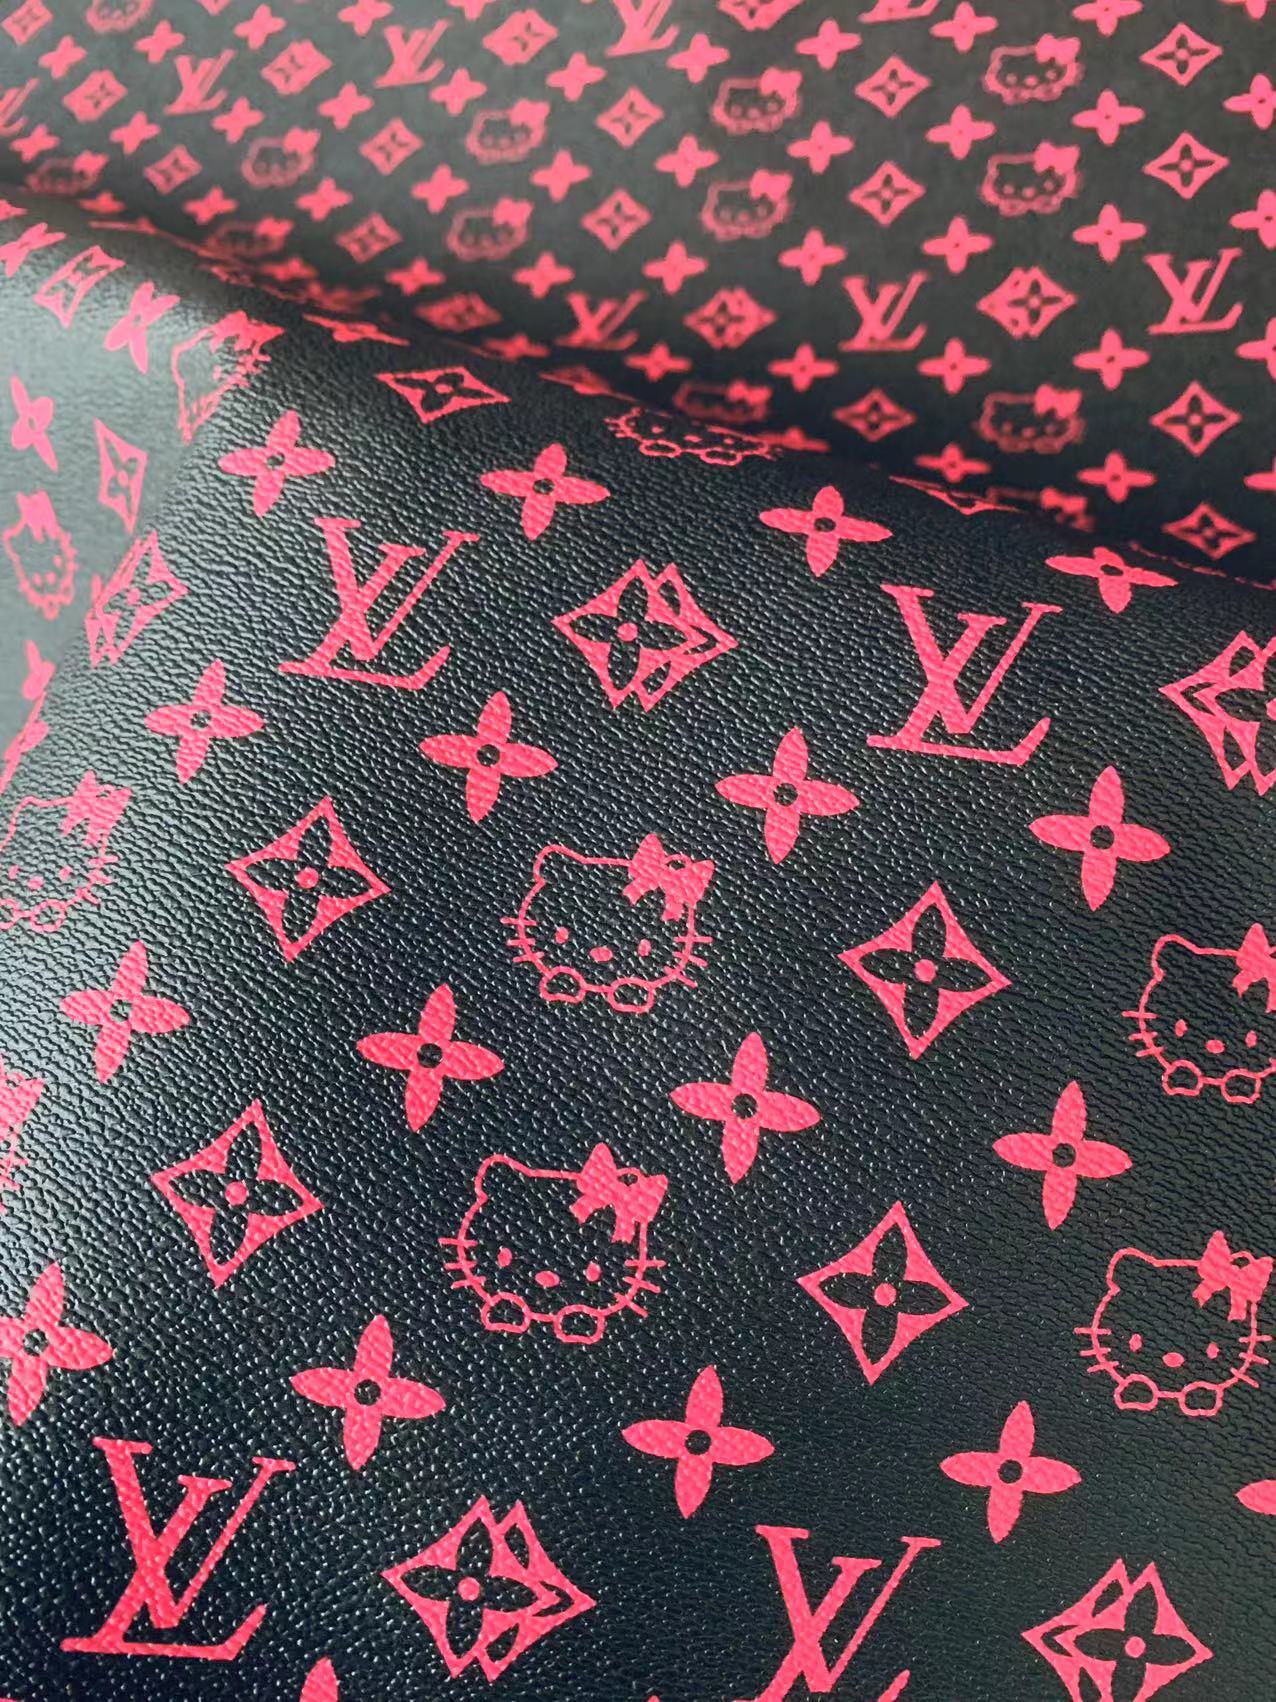 Fashion Black With Pink LV Hello Kitty Vinyl Leather For Bag ,Shoes ,Handicraft Upholstery By Yards